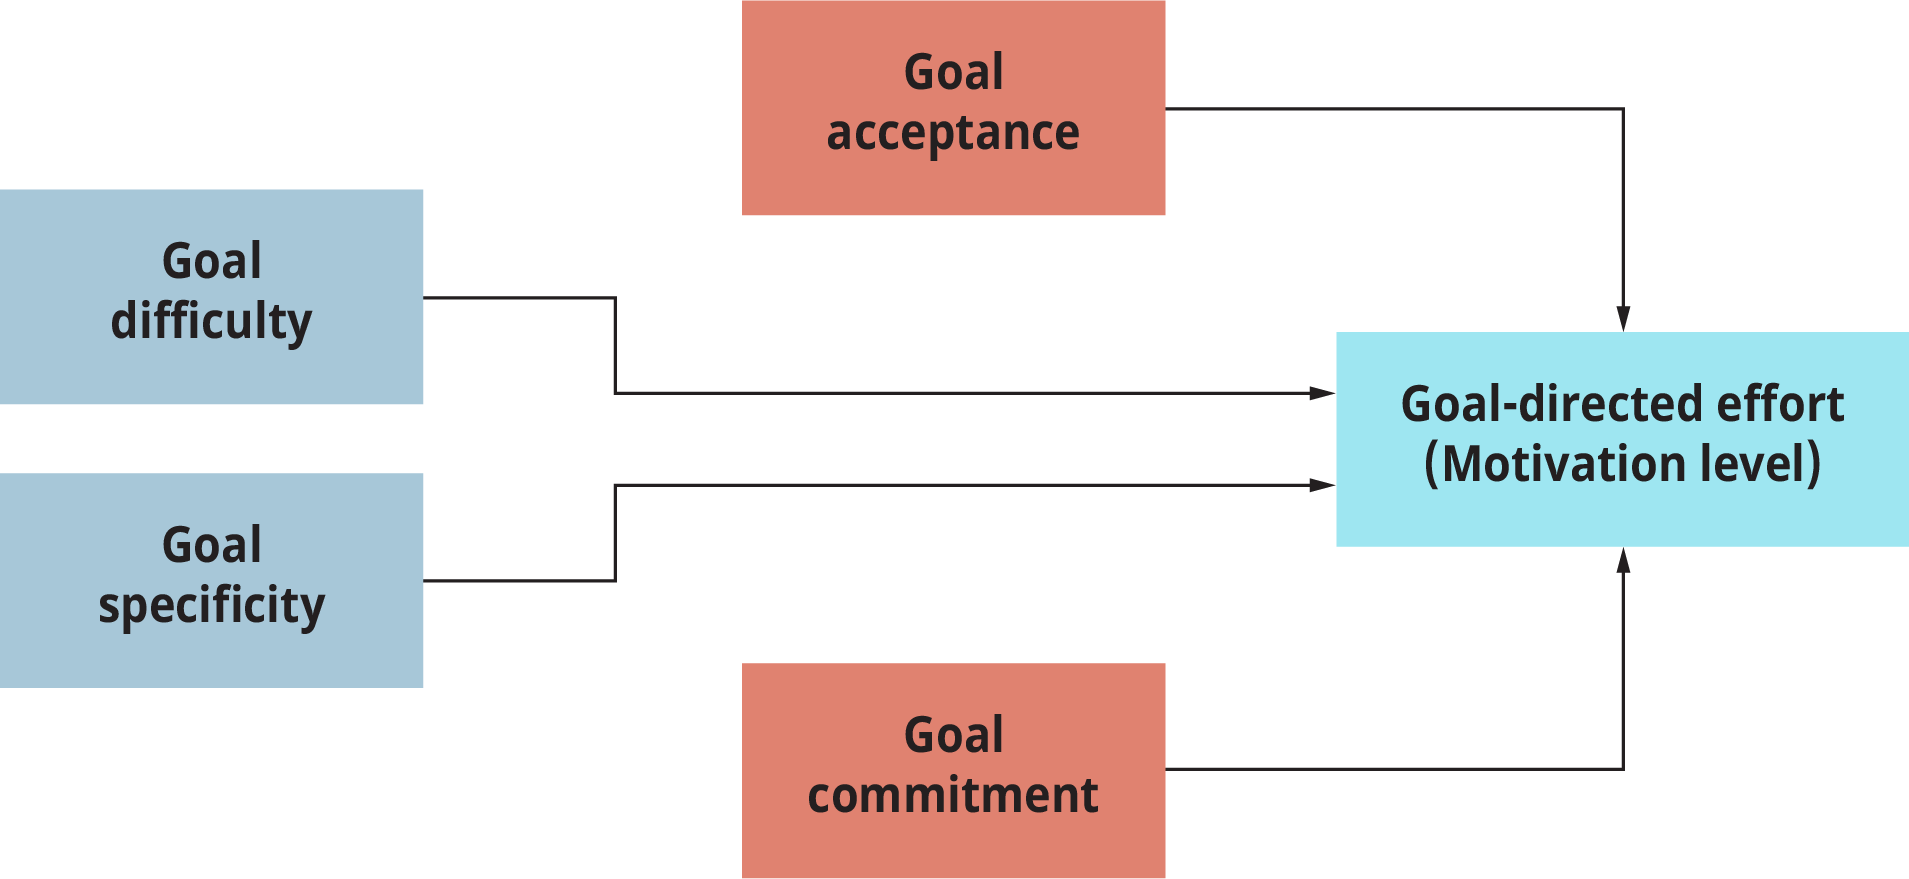 A model of goal setting represents the conditions necessary to maximize goal-directed effort.